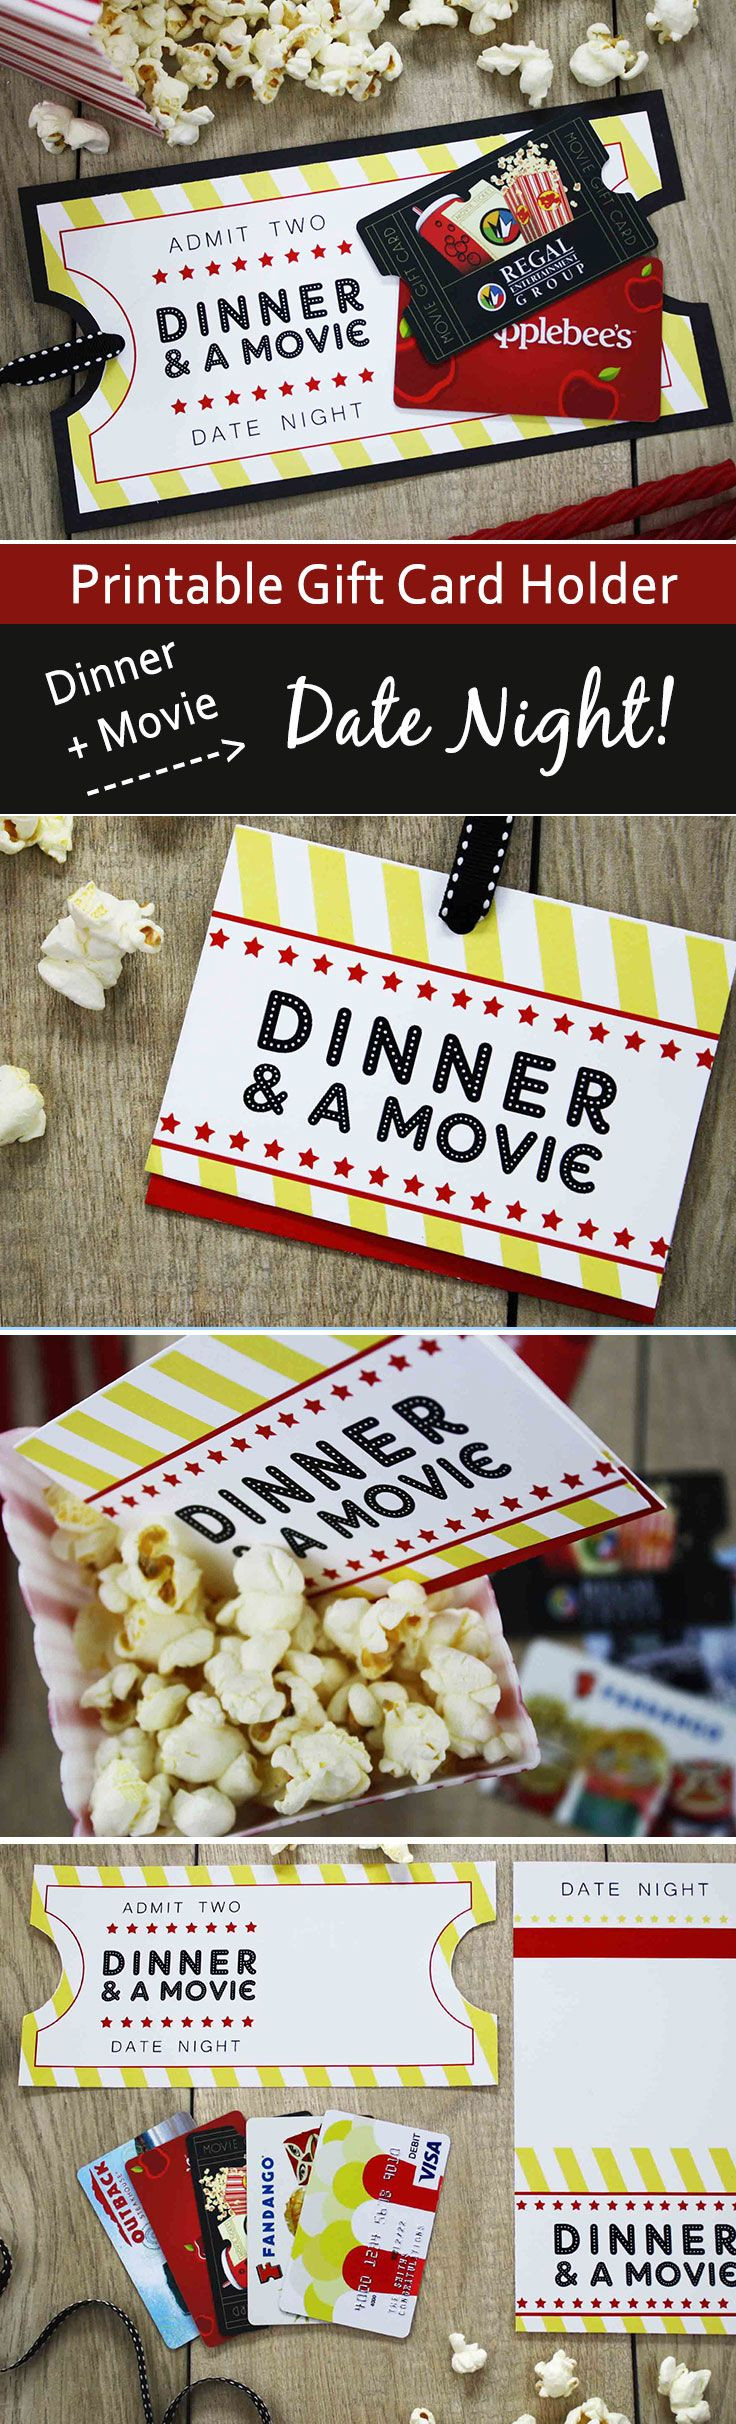 Dinner And A Movie Gift Basket Ideas
 This wedding t card holder is perfect for holding t